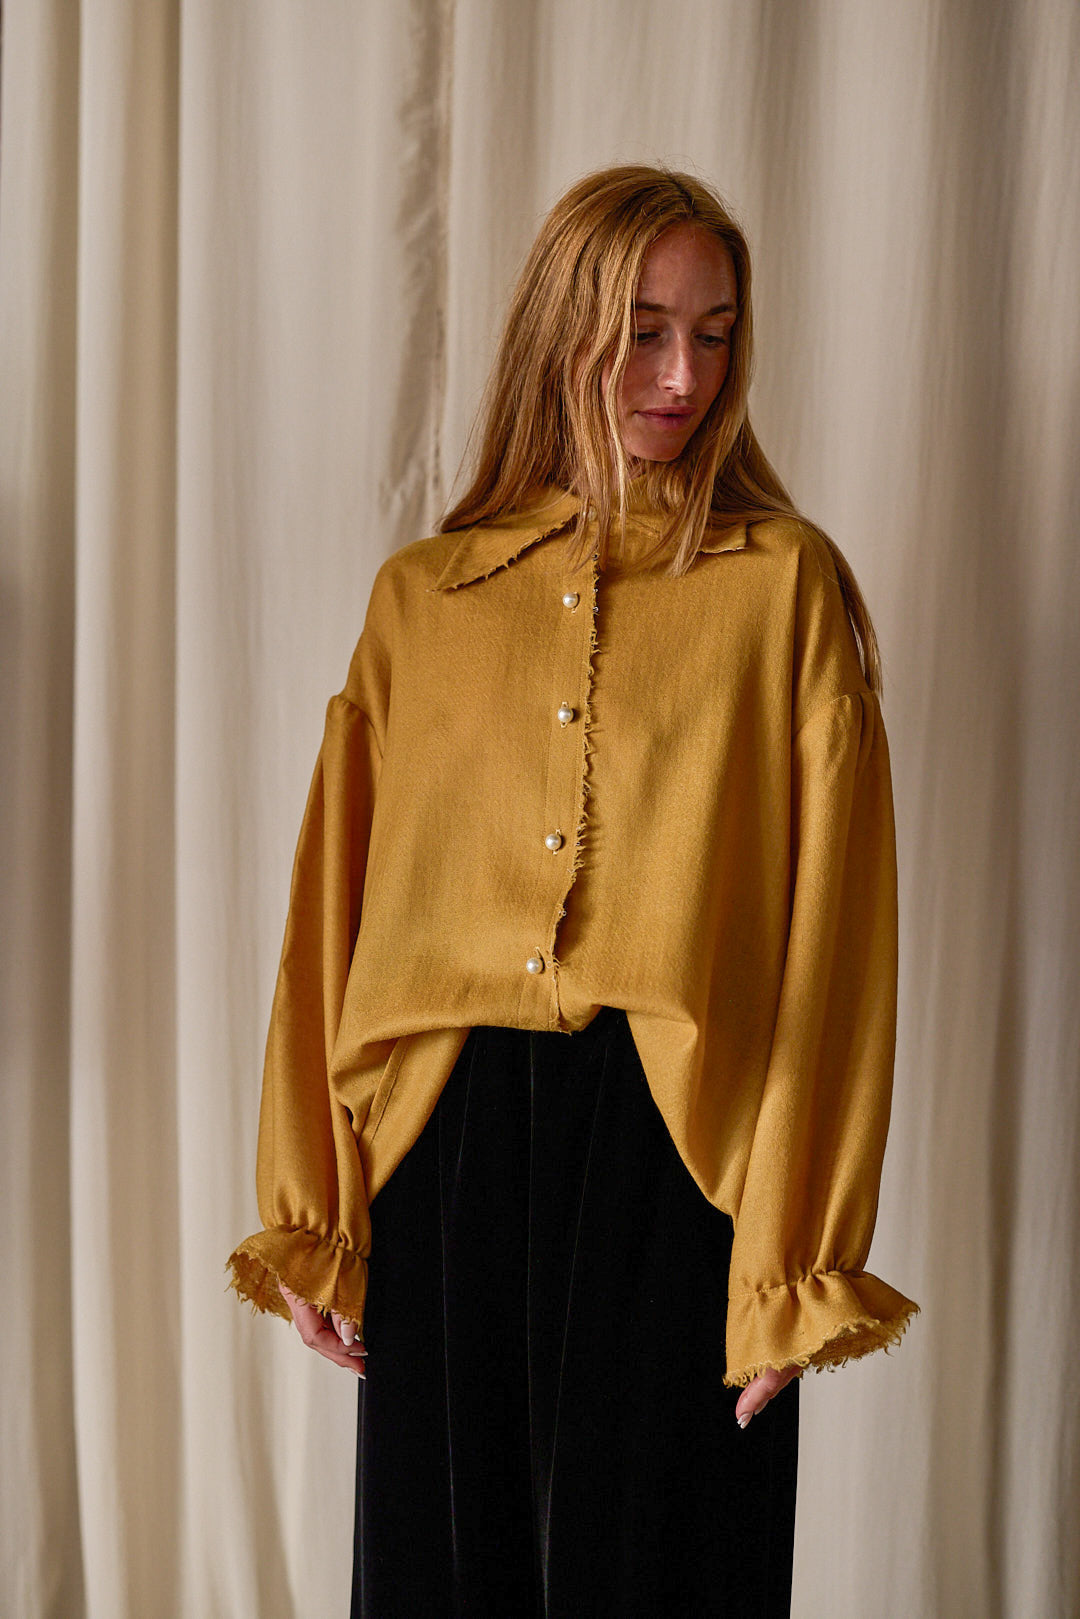 A person with long, light brown hair is standing against a light-colored curtain background. They are wearing a mustard yellow Poet Shirt | Japanese Wool Gauze Gold with pearl buttons and frilled cuffs, paired with black pants. The blouse, made from Japanese wool gauze, has a distinct collar and a loose, oversized fit.